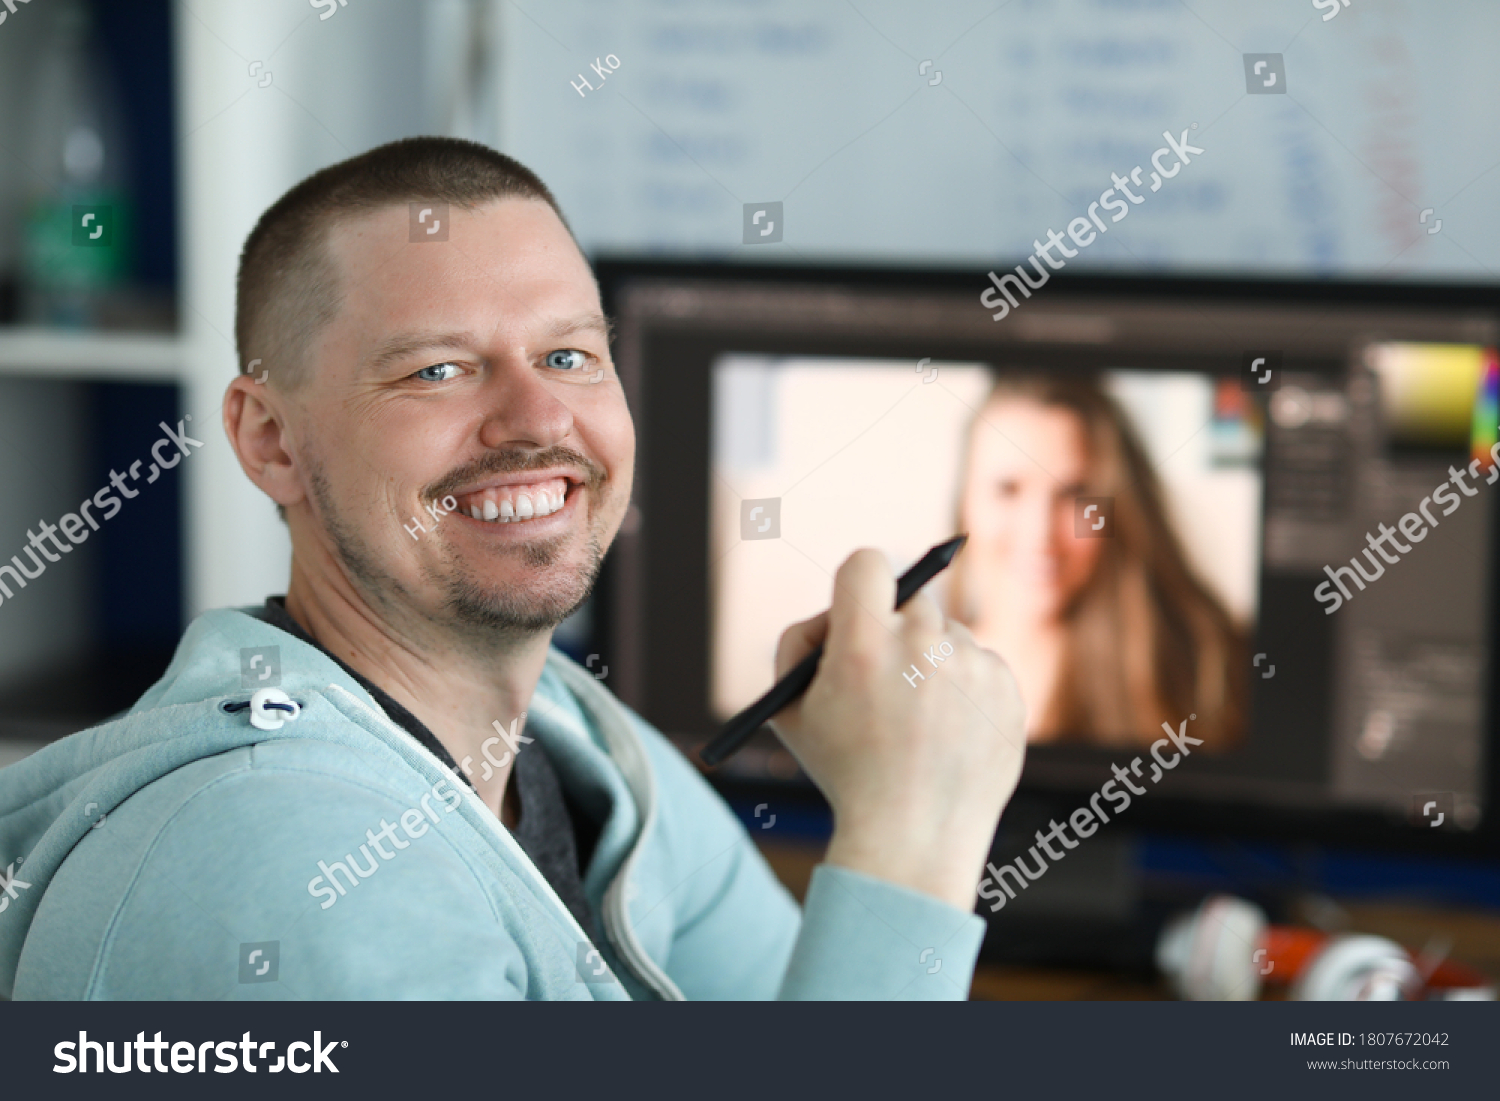 Smiling man holding an electronic pen in his hand from behind on computer background. Learning professions for remote work concept #1807672042